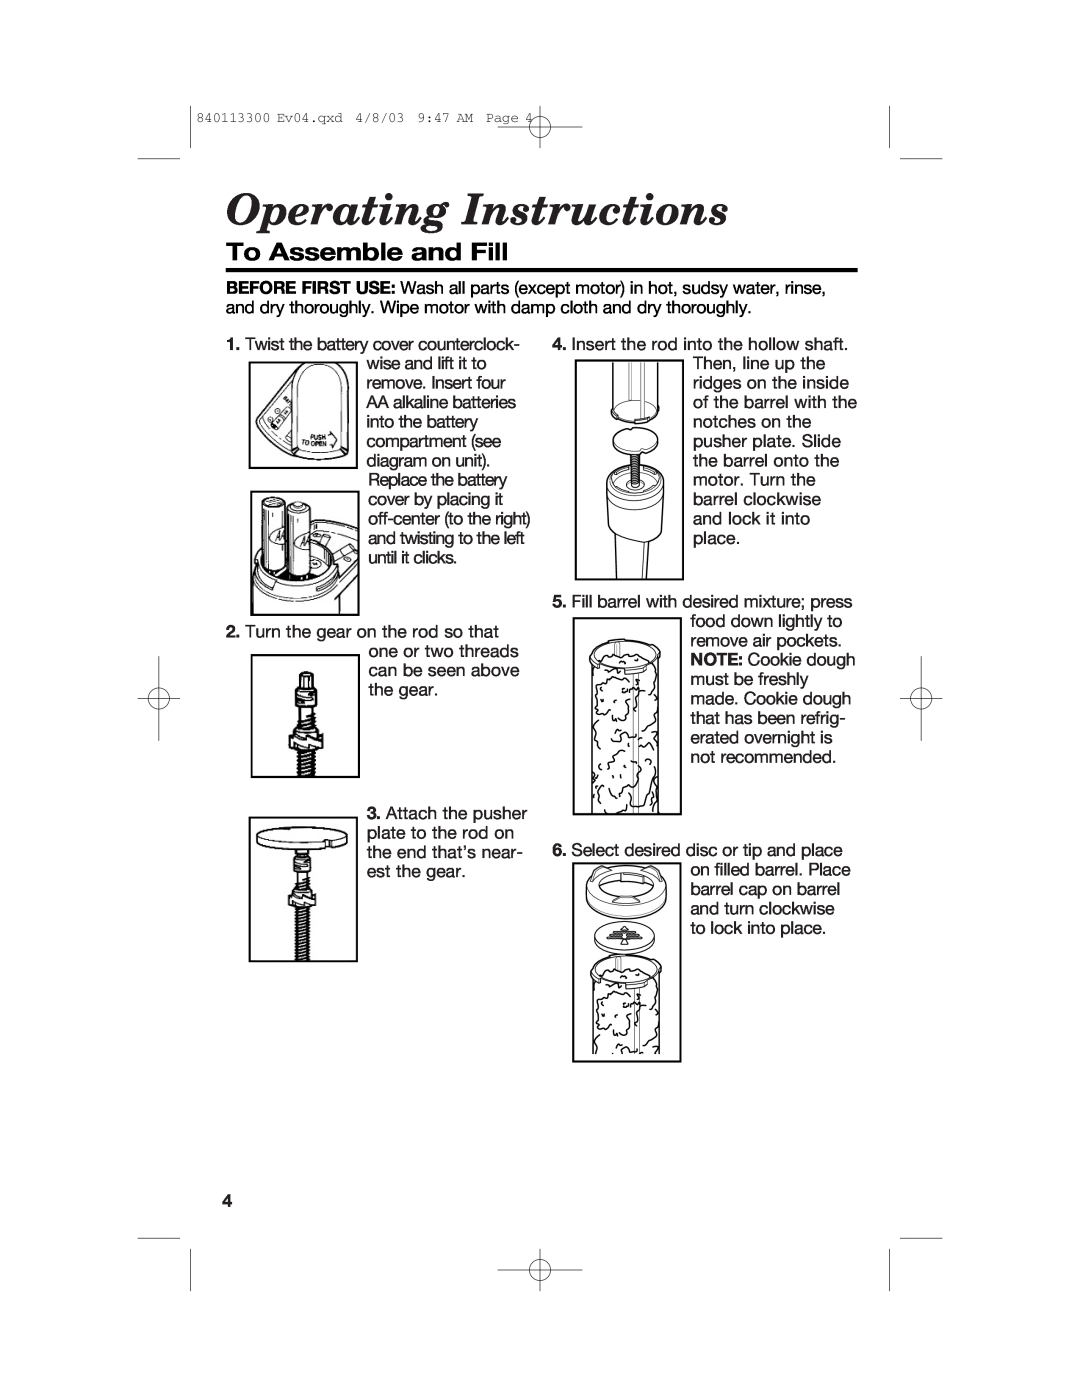 Hamilton Beach 840113300 operating instructions Operating Instructions, To Assemble and Fill 